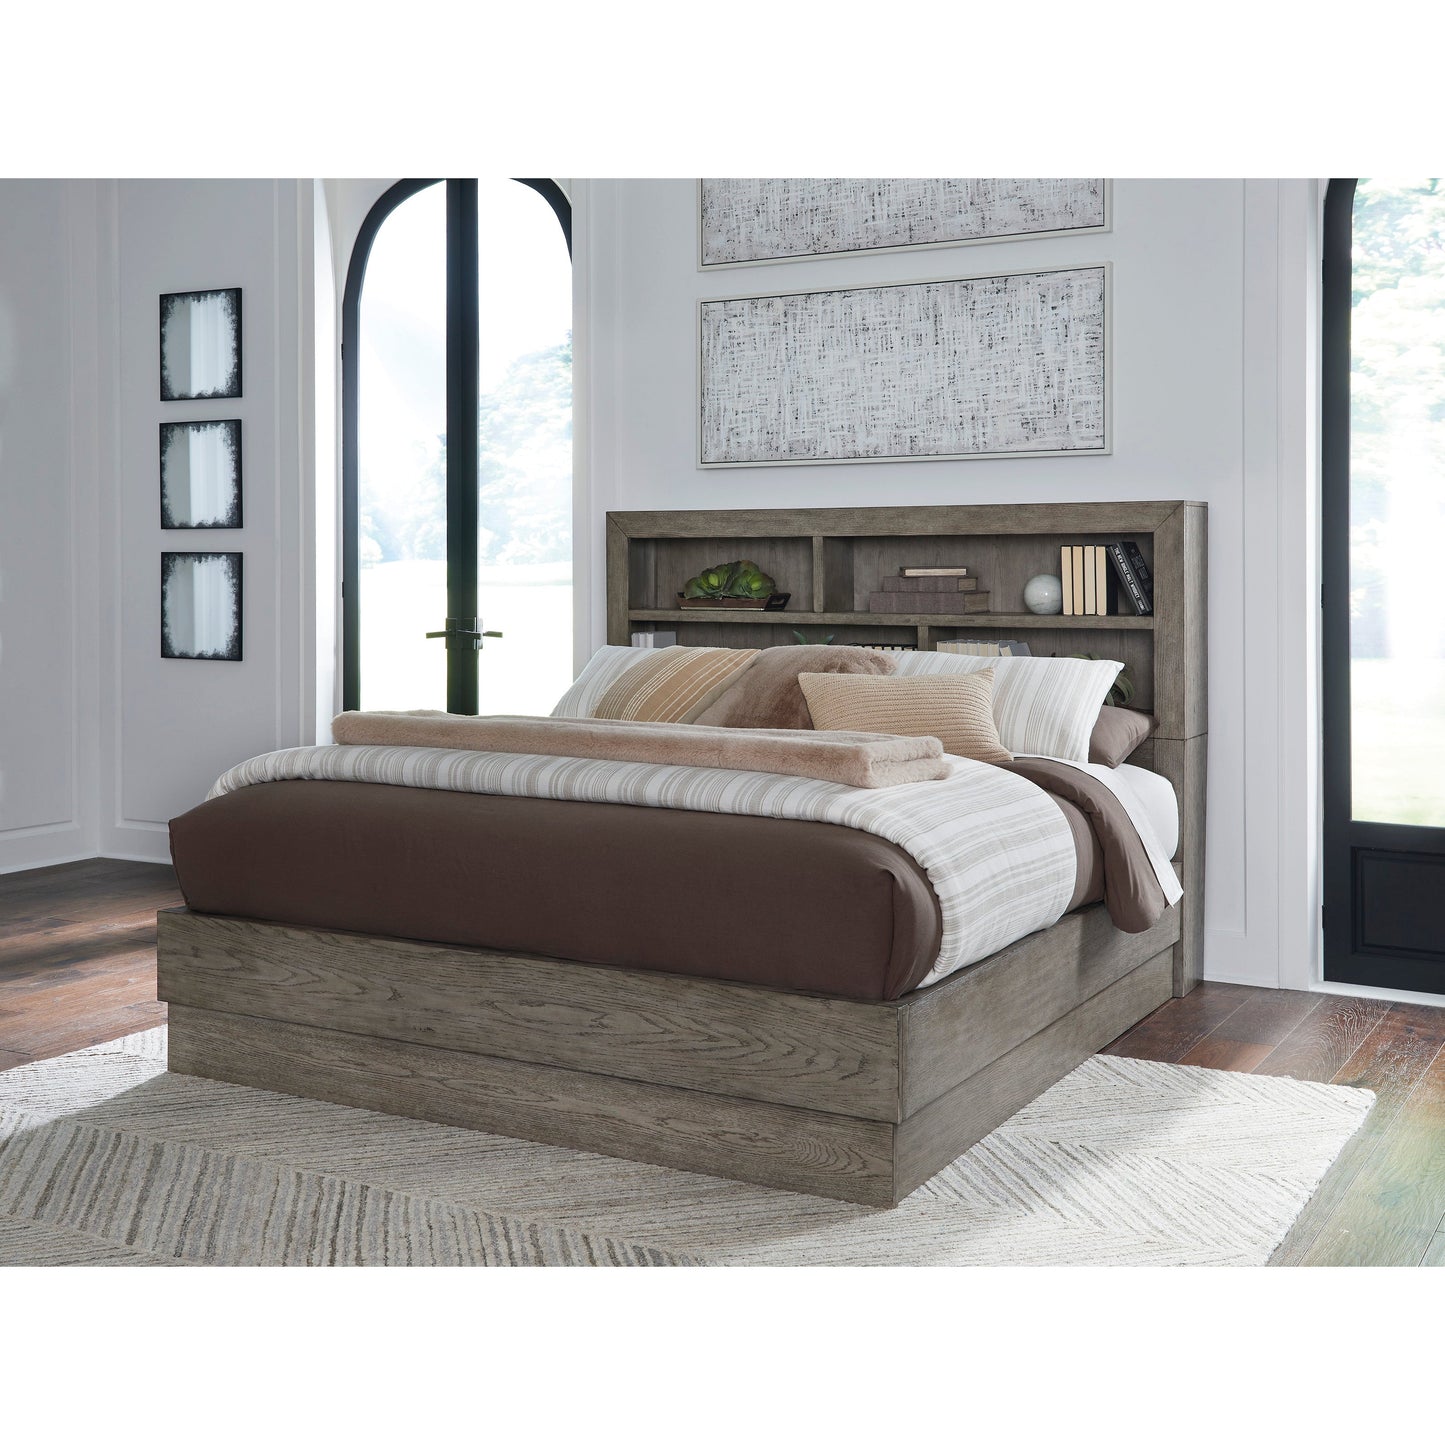 ANIBECCA BOOKCASE BED - WEATHERED GRAY